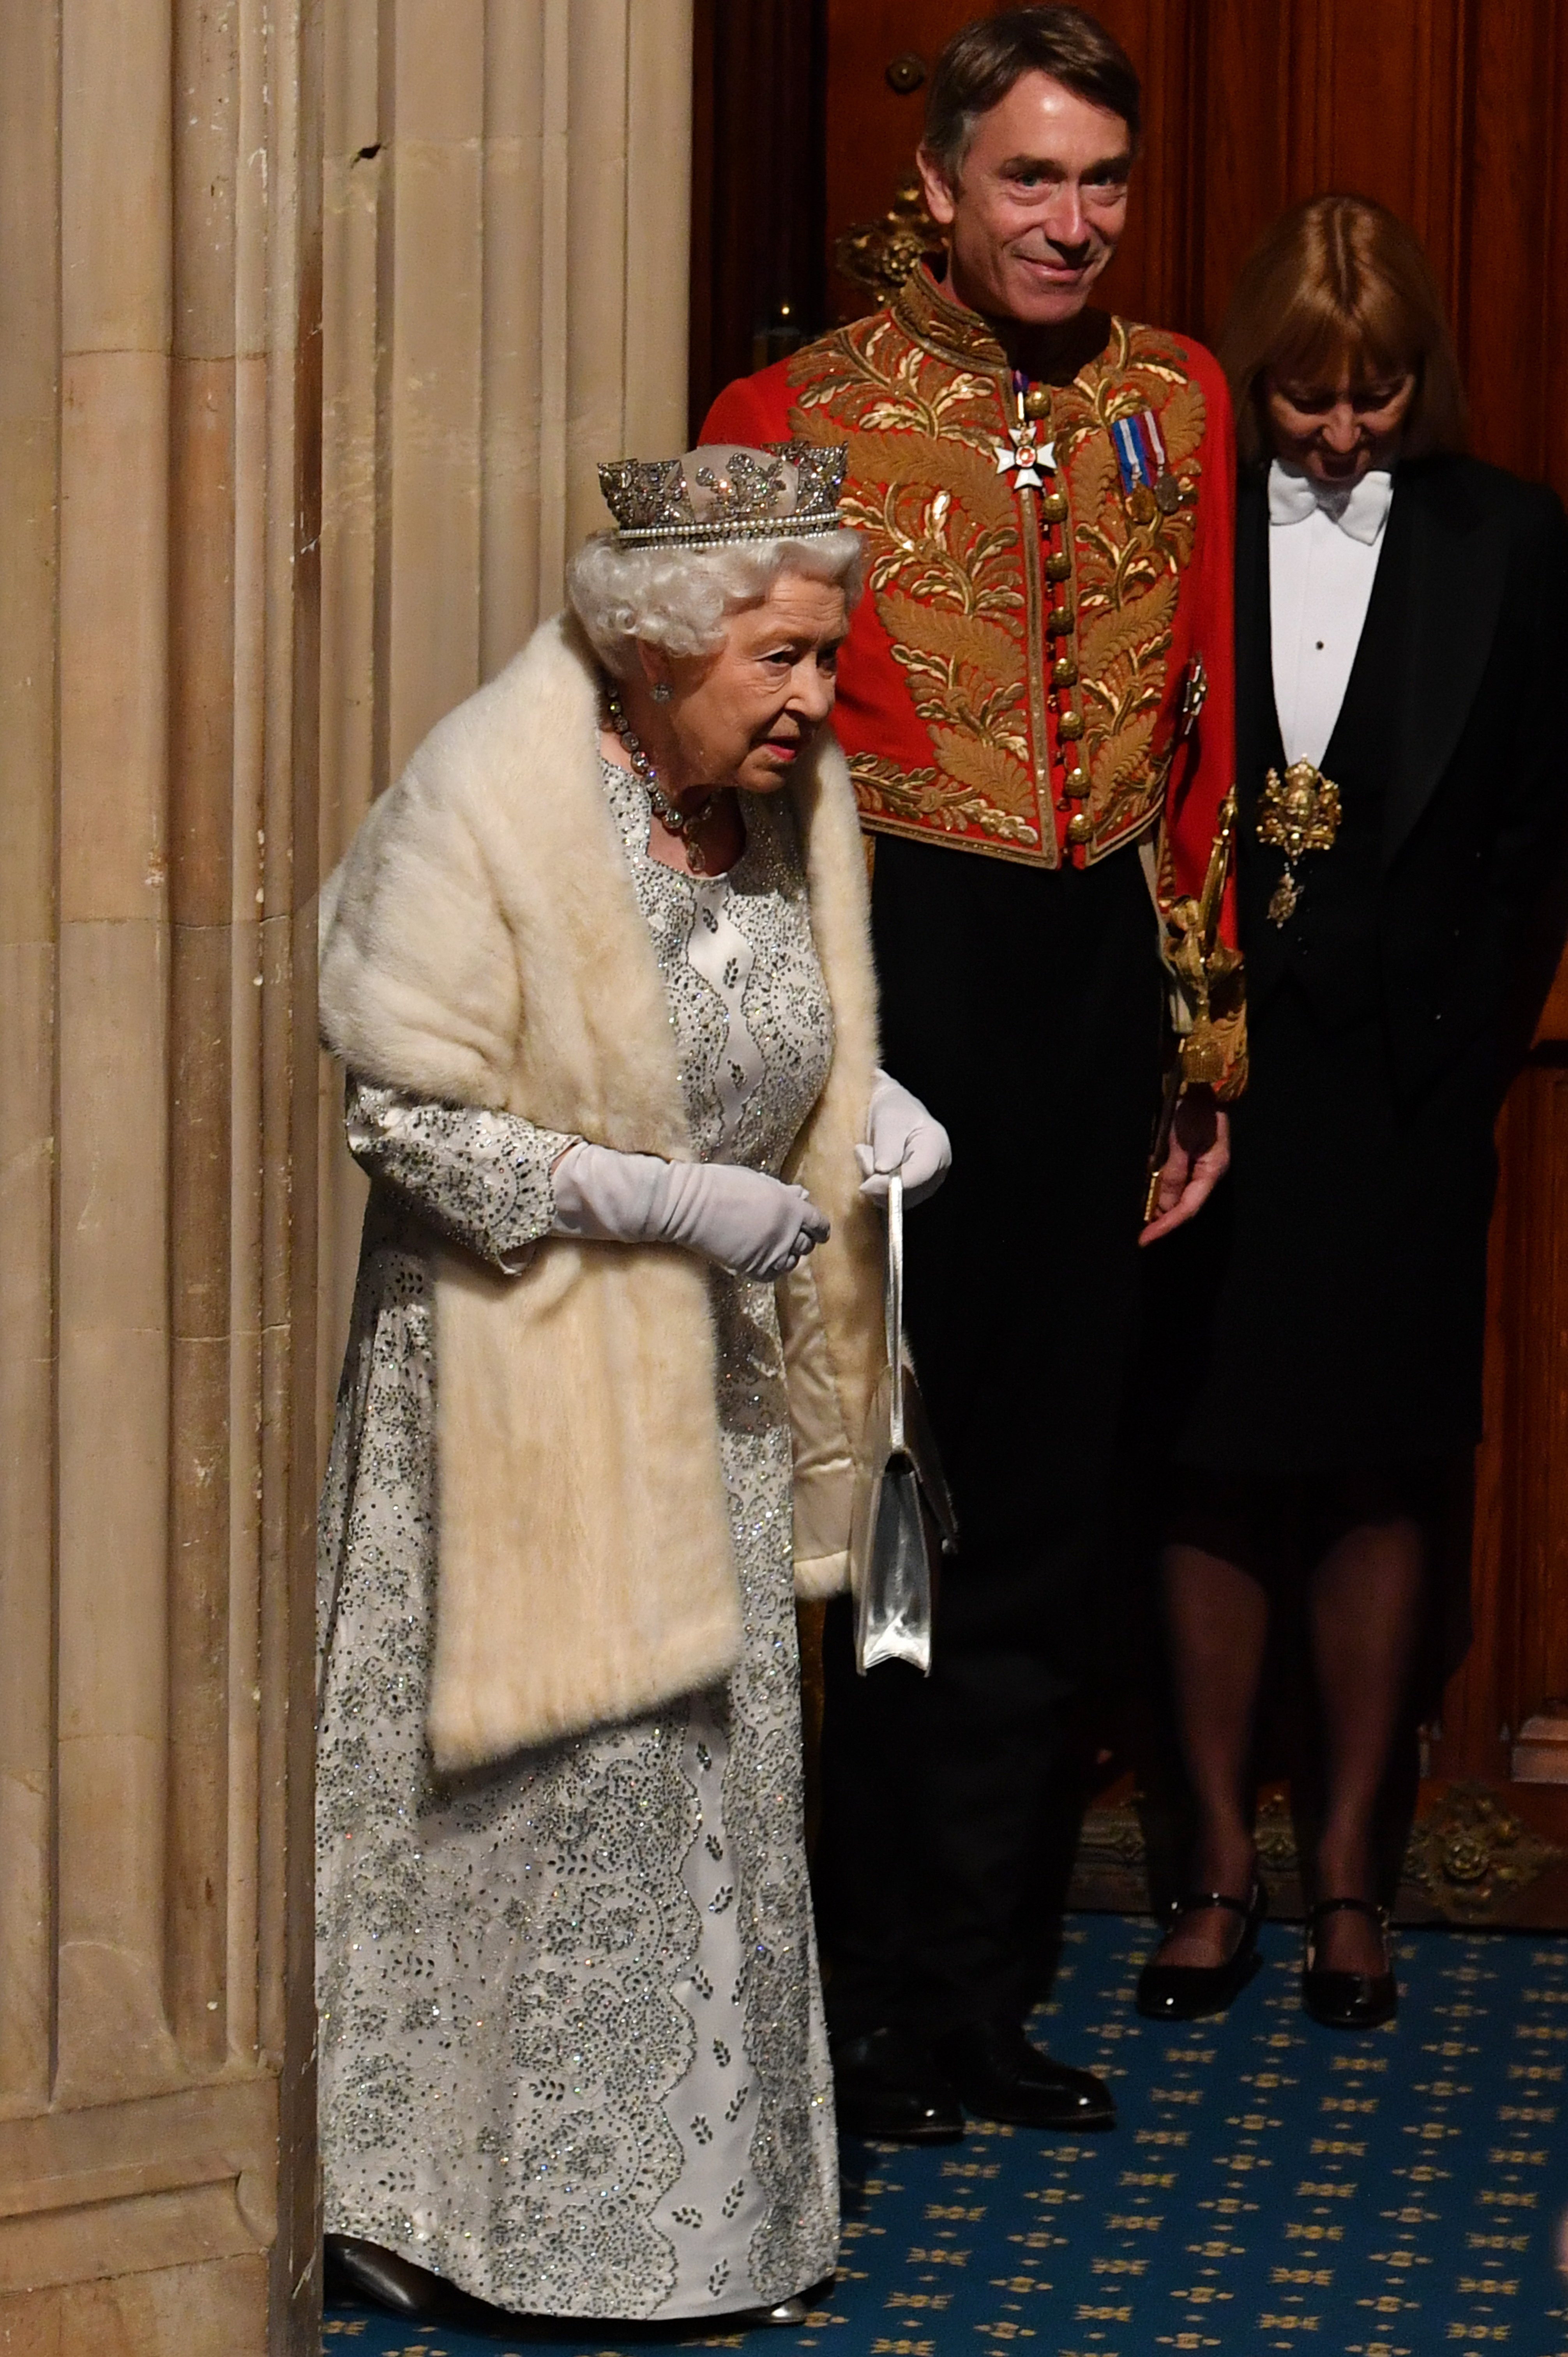 Queen Elizabeth II (L) arrives with David Cholmondeley, Marquess of Cholmondeley, (2L) to attend the State Opening of Parliament at the Palace of Westminster on October 14, 2019, in London, England. | Source: Getty Images.